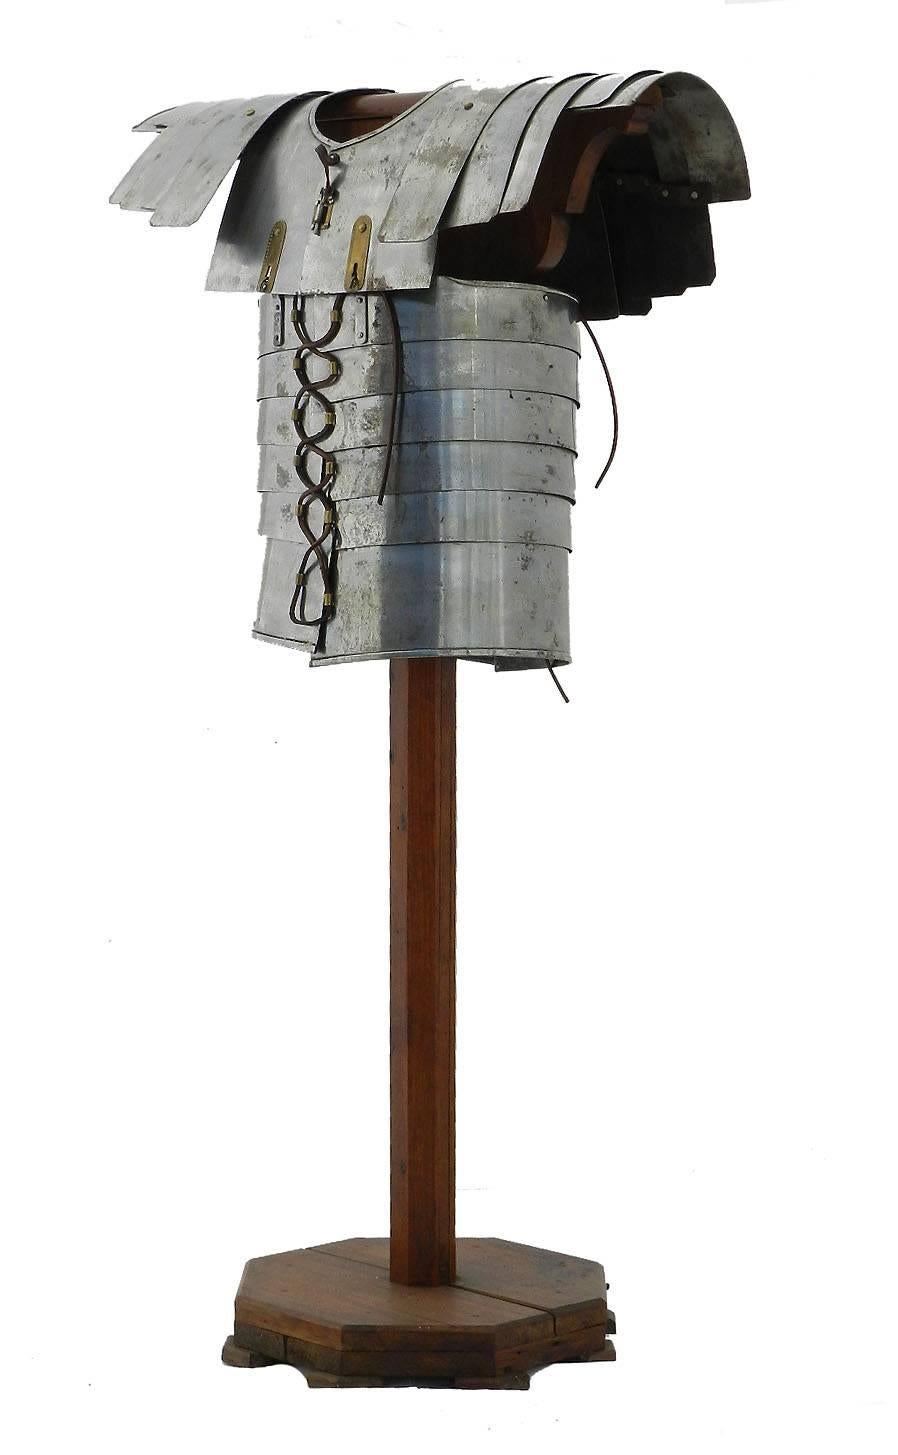 Decorative Roman armour Amor on stand 20th century.
In good conditiion with signs of age full of character 
Superb for decoration library, hall, good conversation piece
